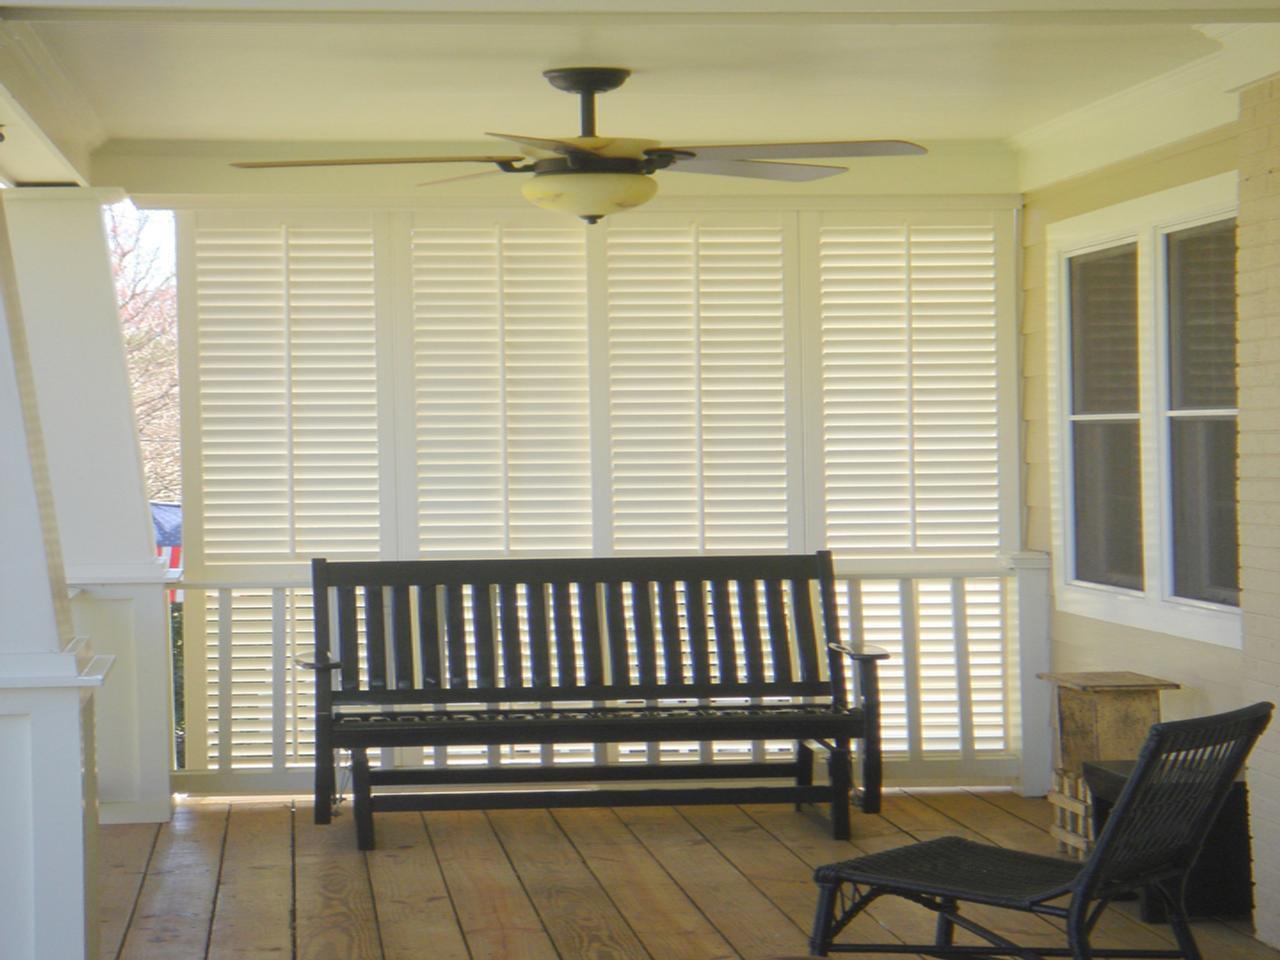 Louverwood shutters on a front porch